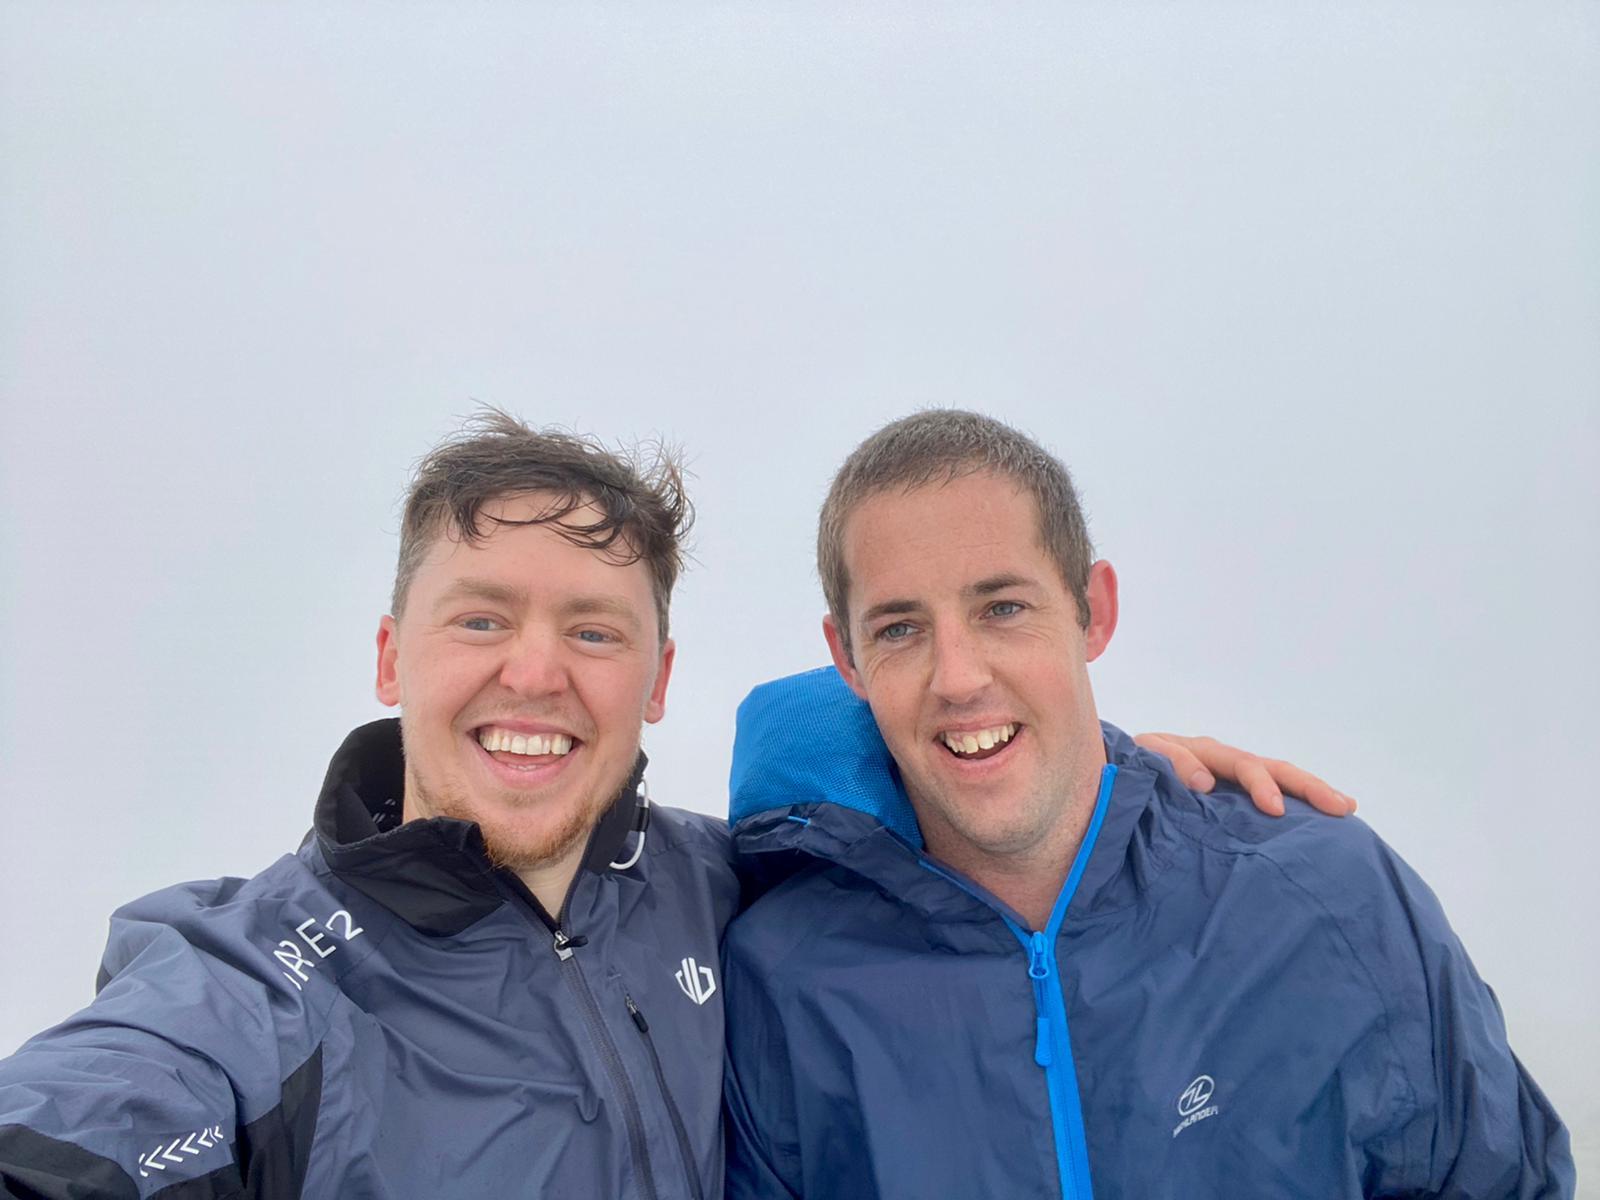 Daniel was joined by his cousin Jason at Snowdon